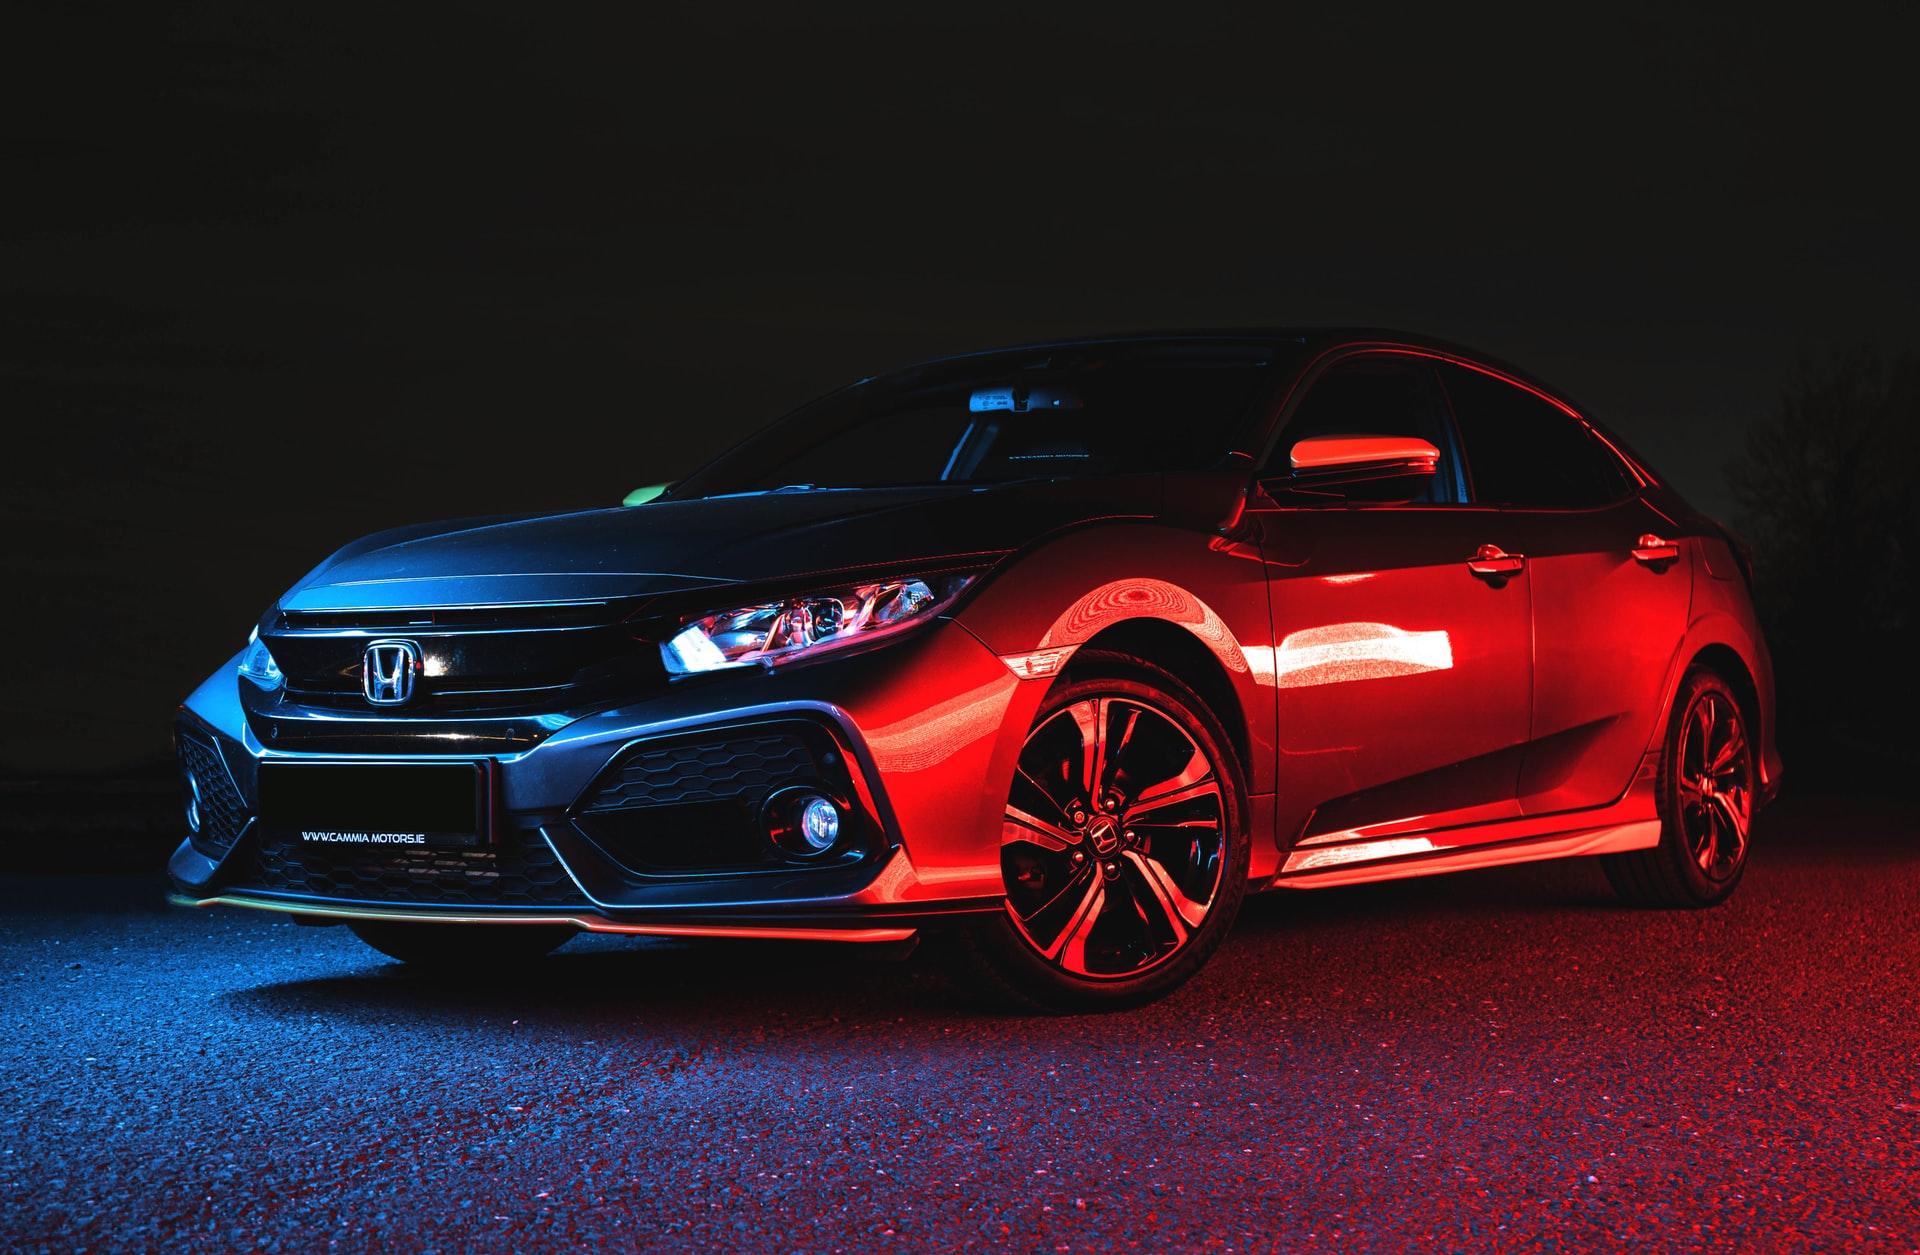 Honda sells the best small cars on the market.